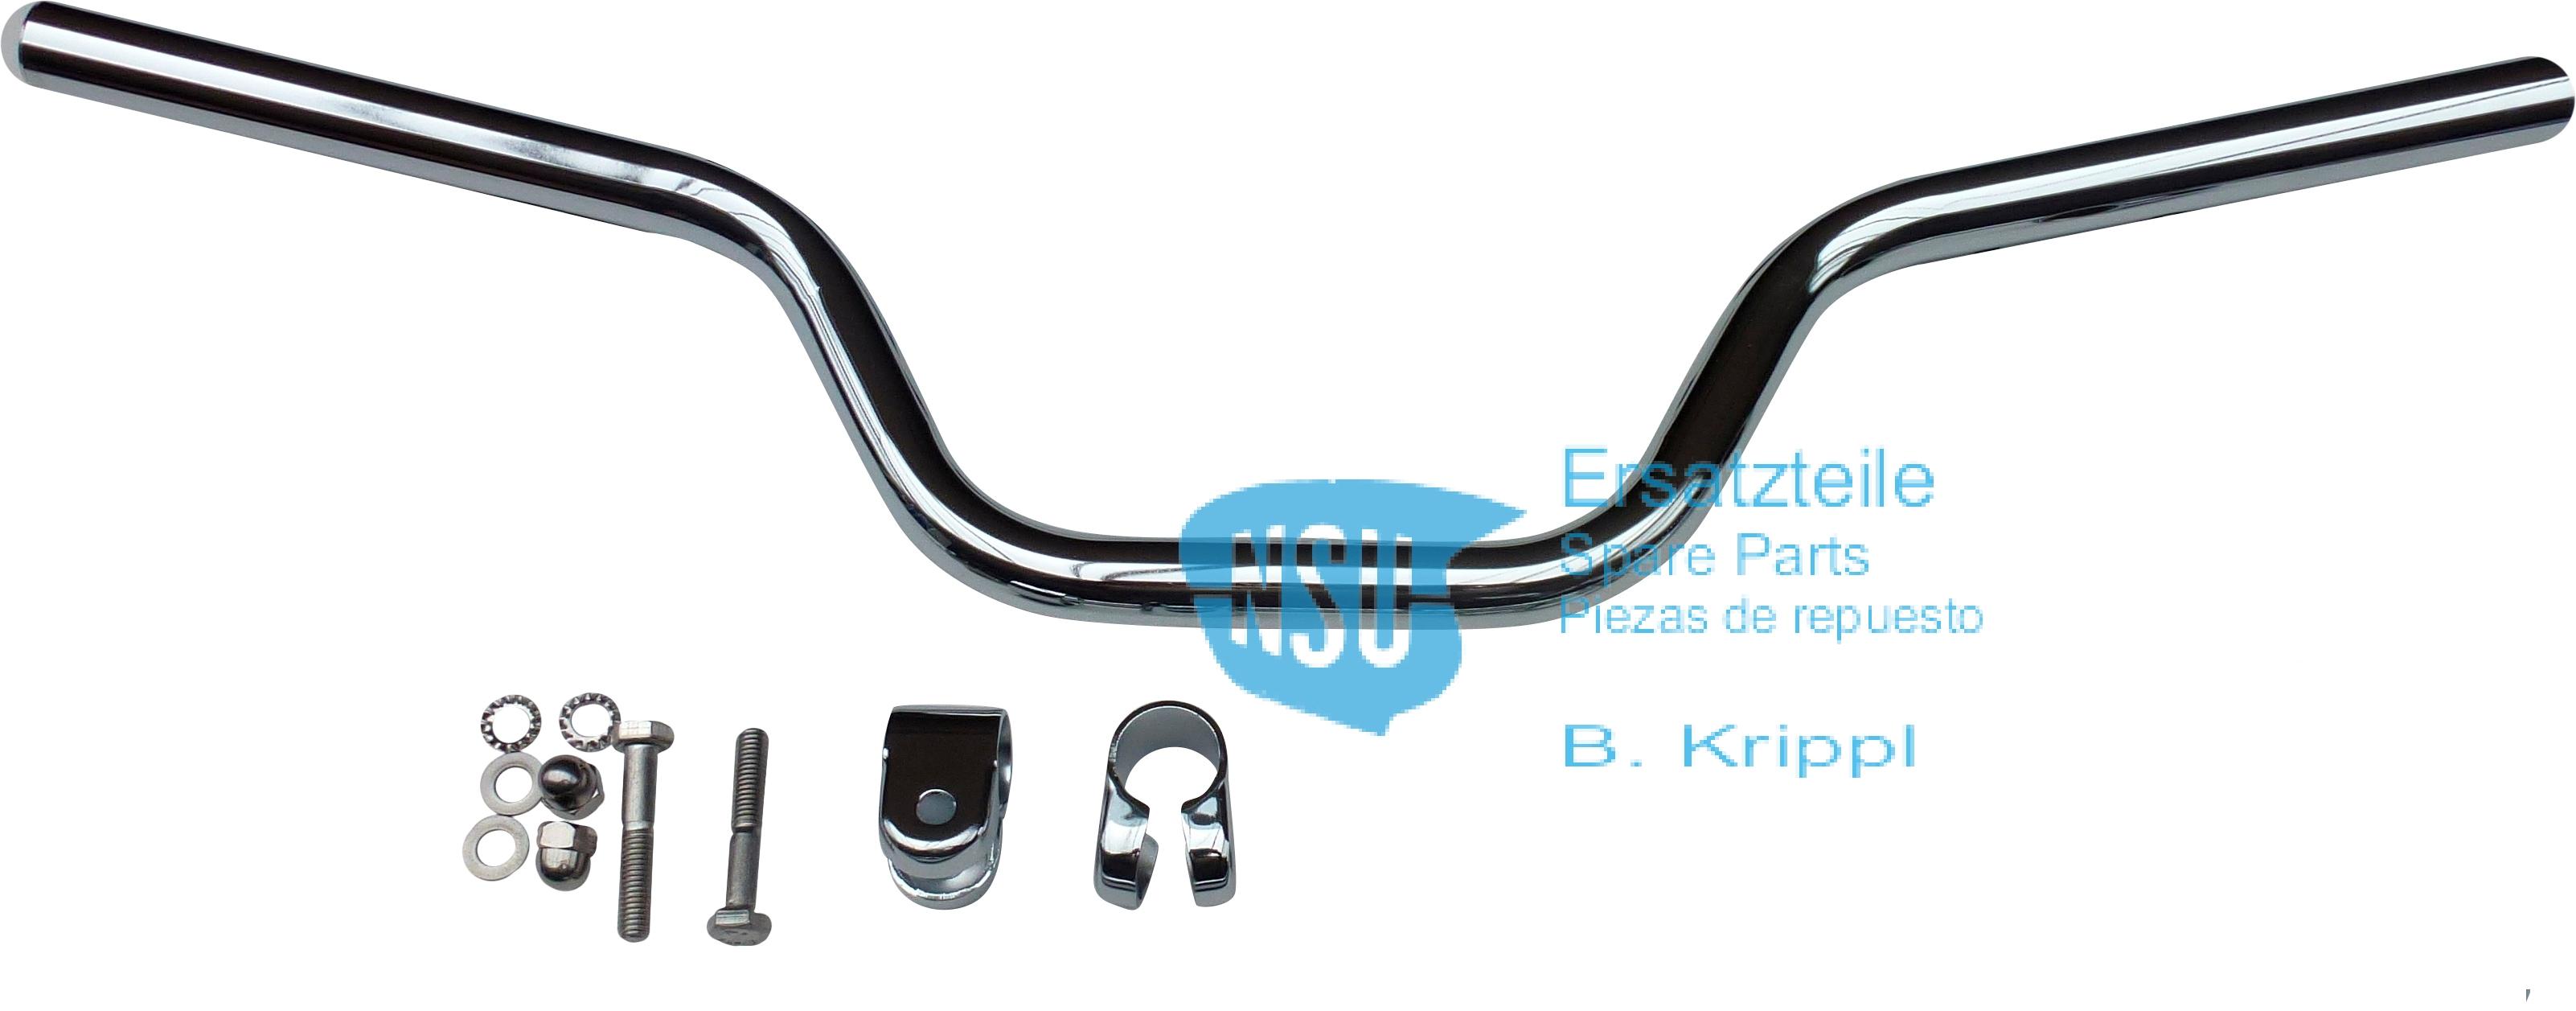 Set of handlebars, Quickly N23,S23,S23-2,F 